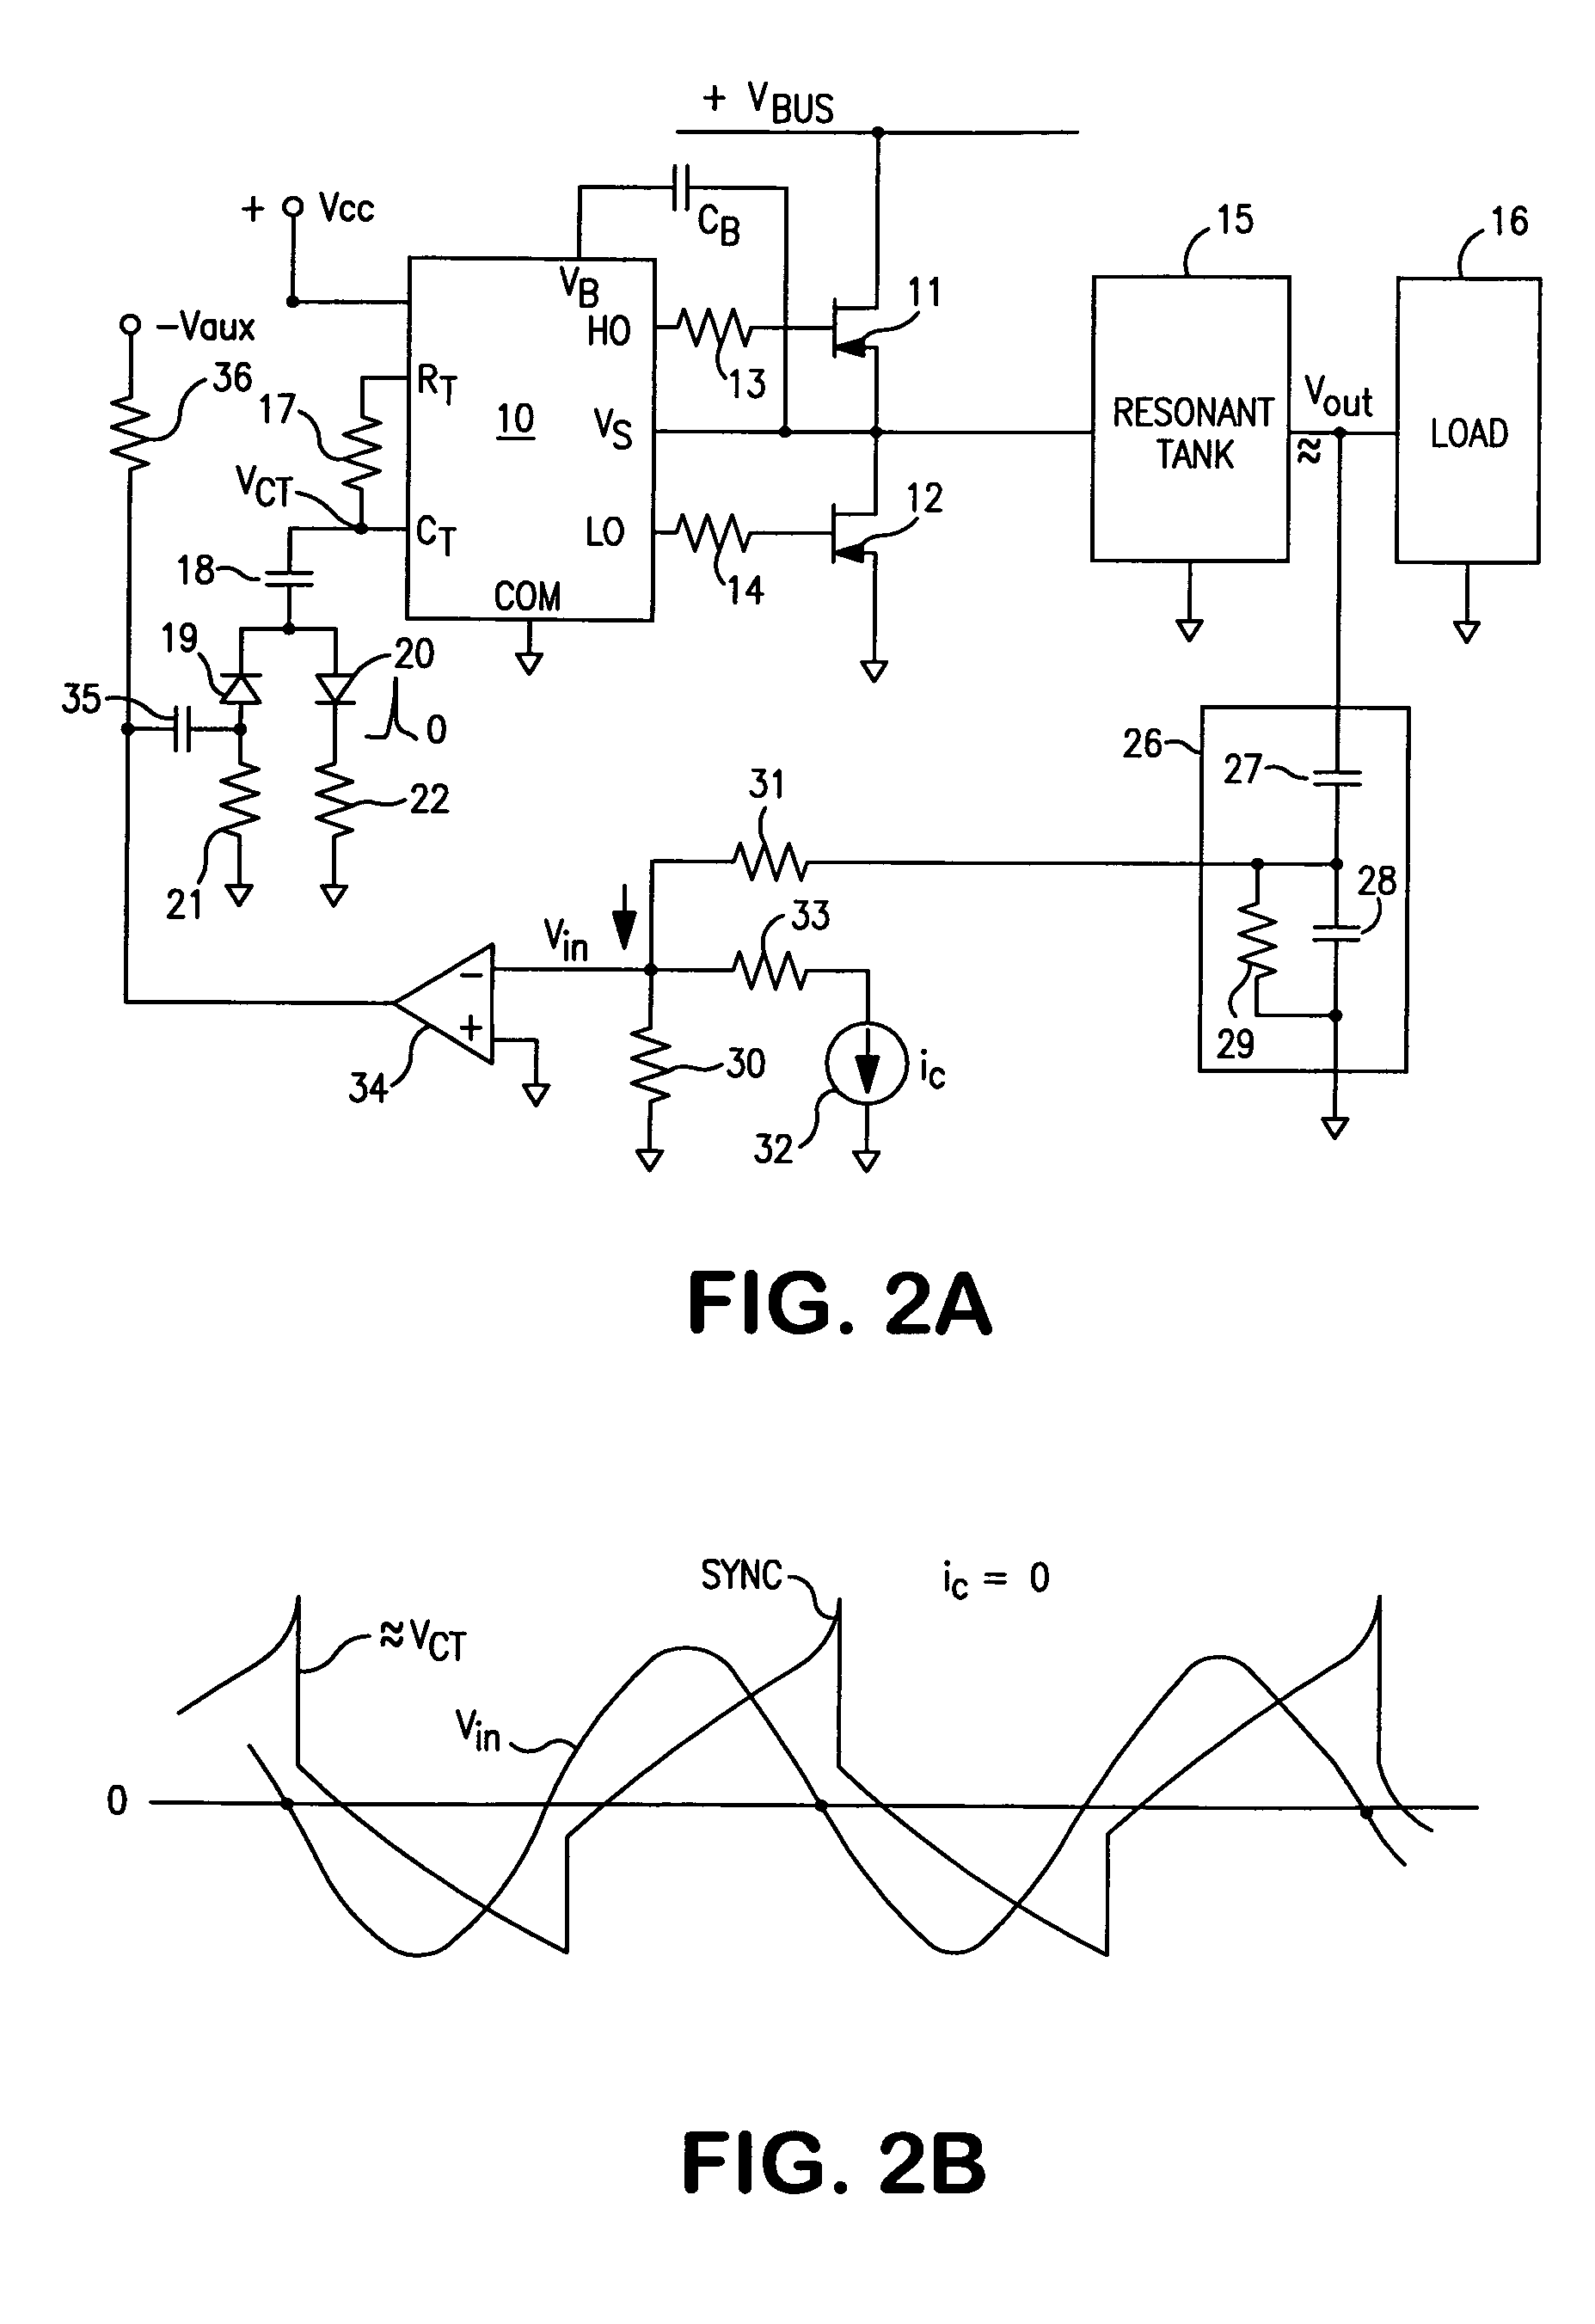 Control system for a resonant inverter with a self-oscillating driver